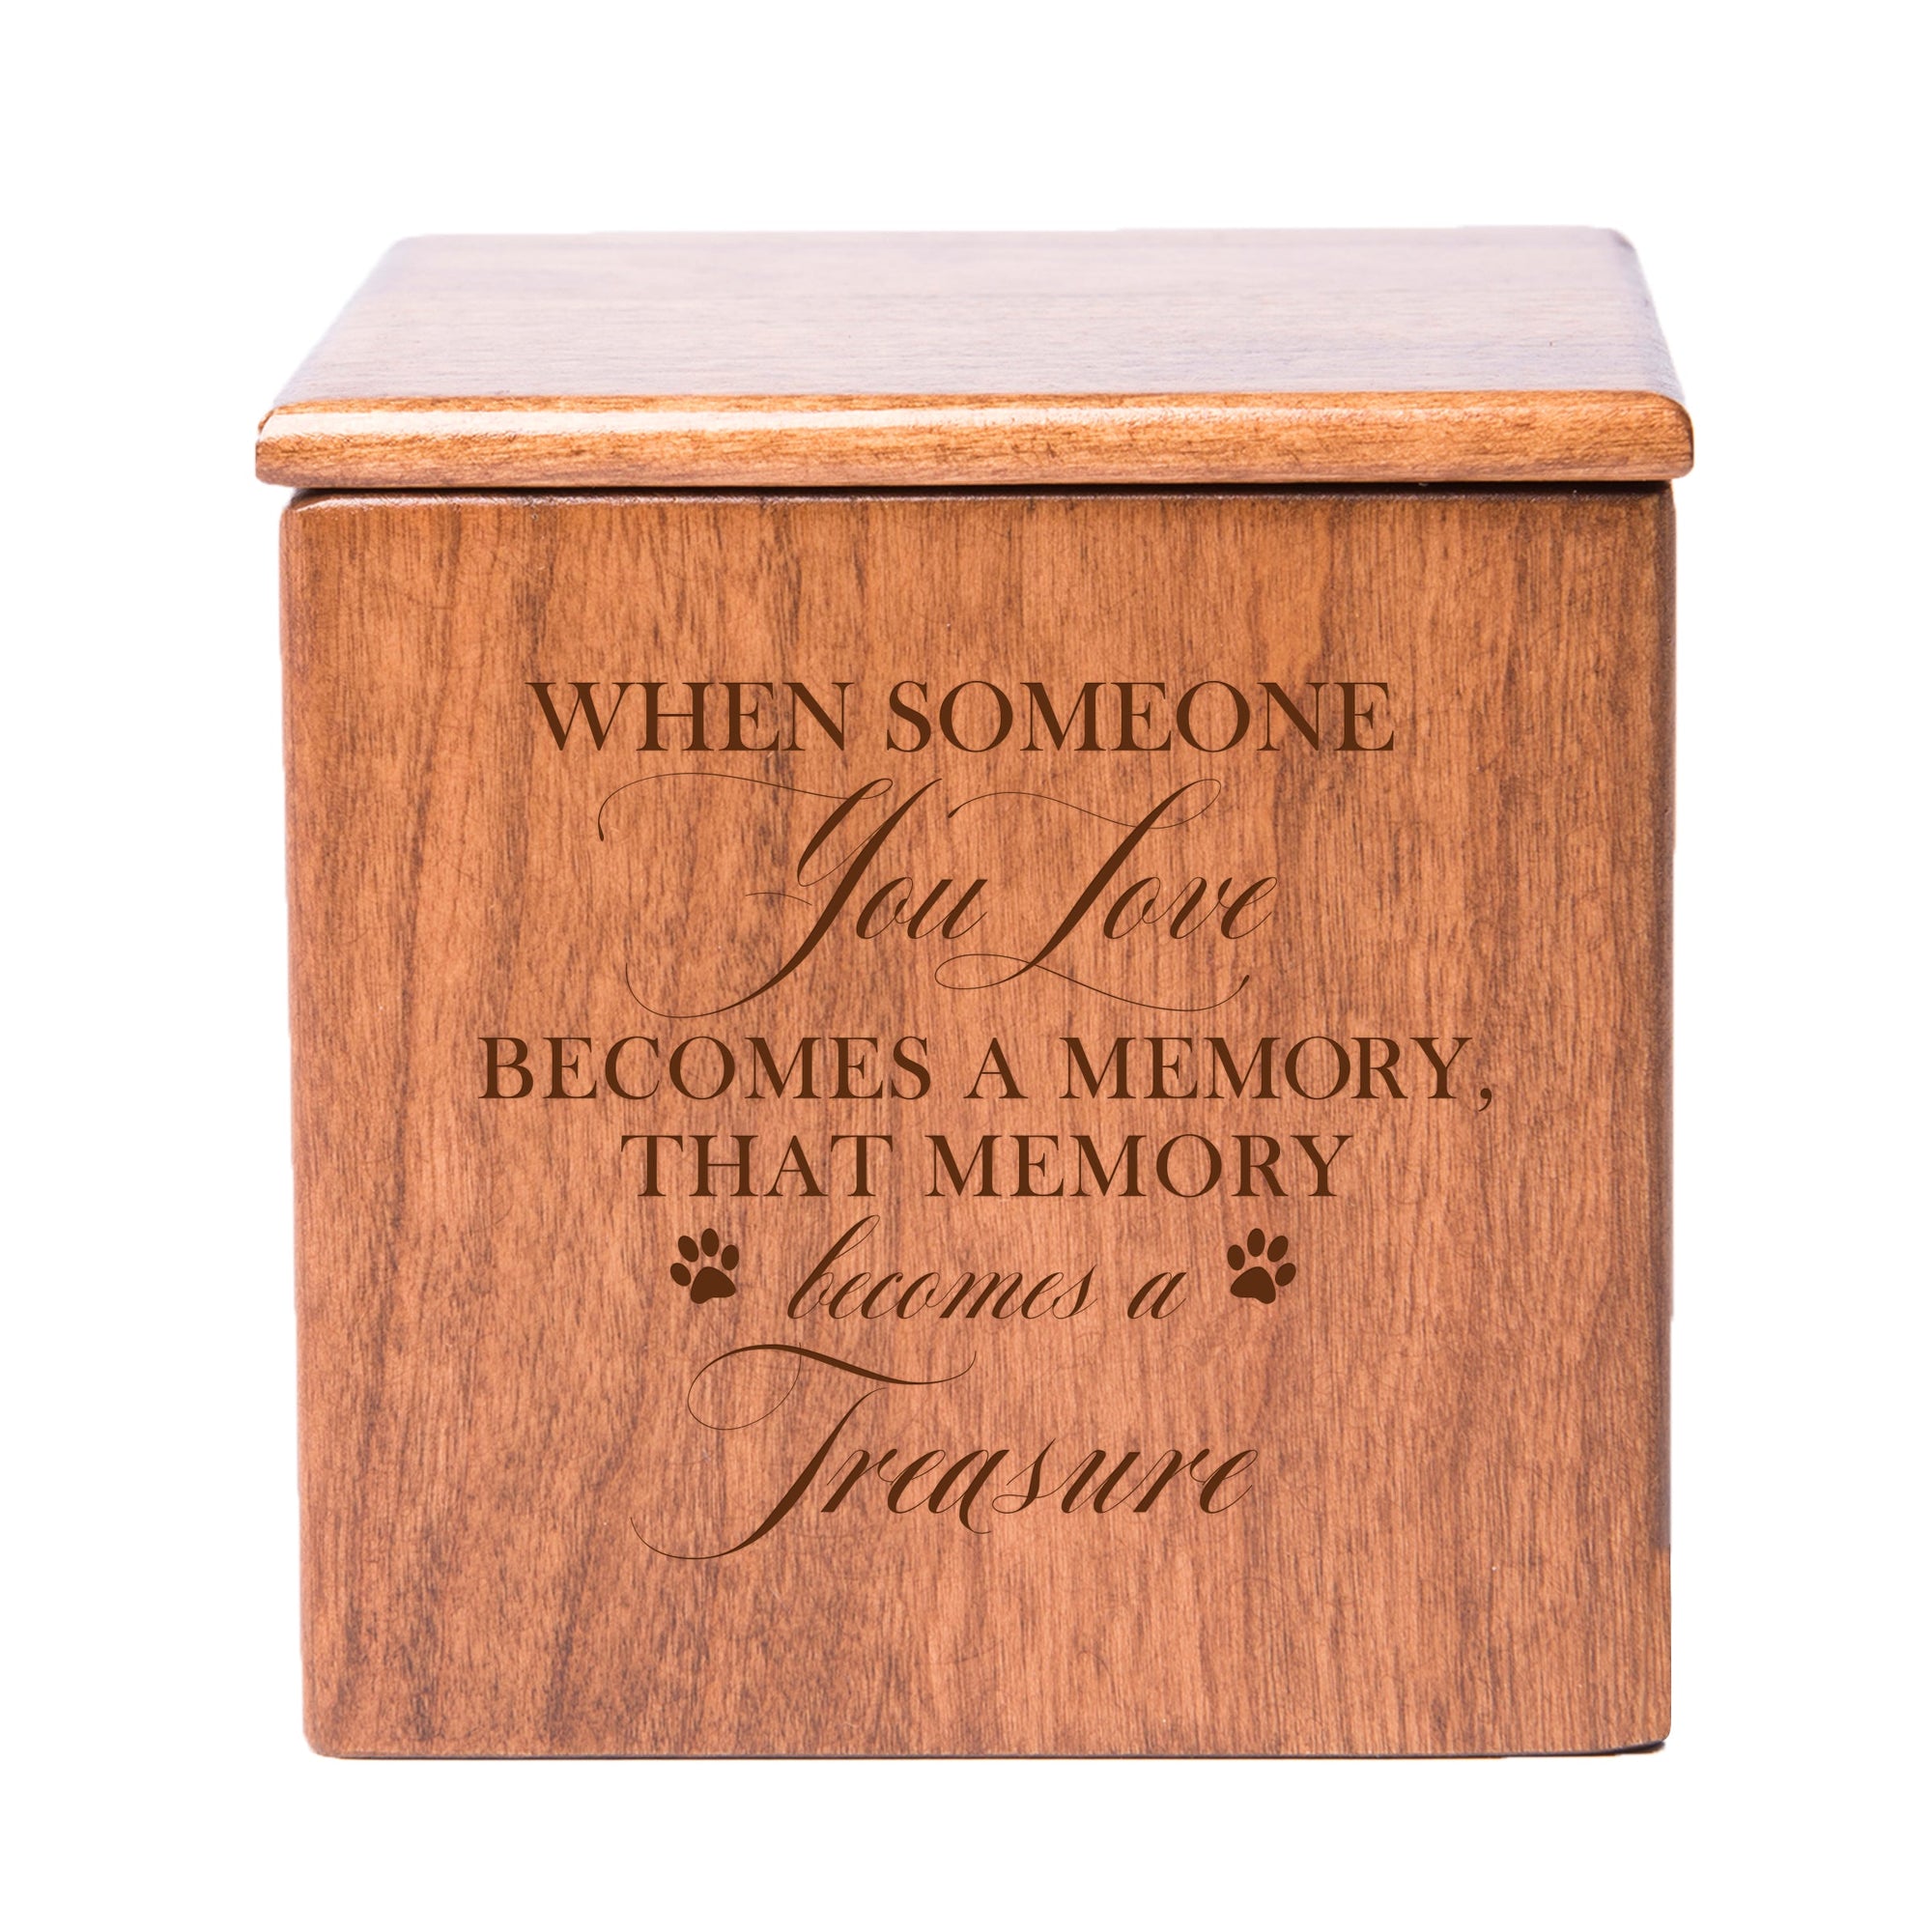 Pet Memorial Keepsake Cremation Urn Box for Dog or Cat - When Someone You Love Becomes A Memory